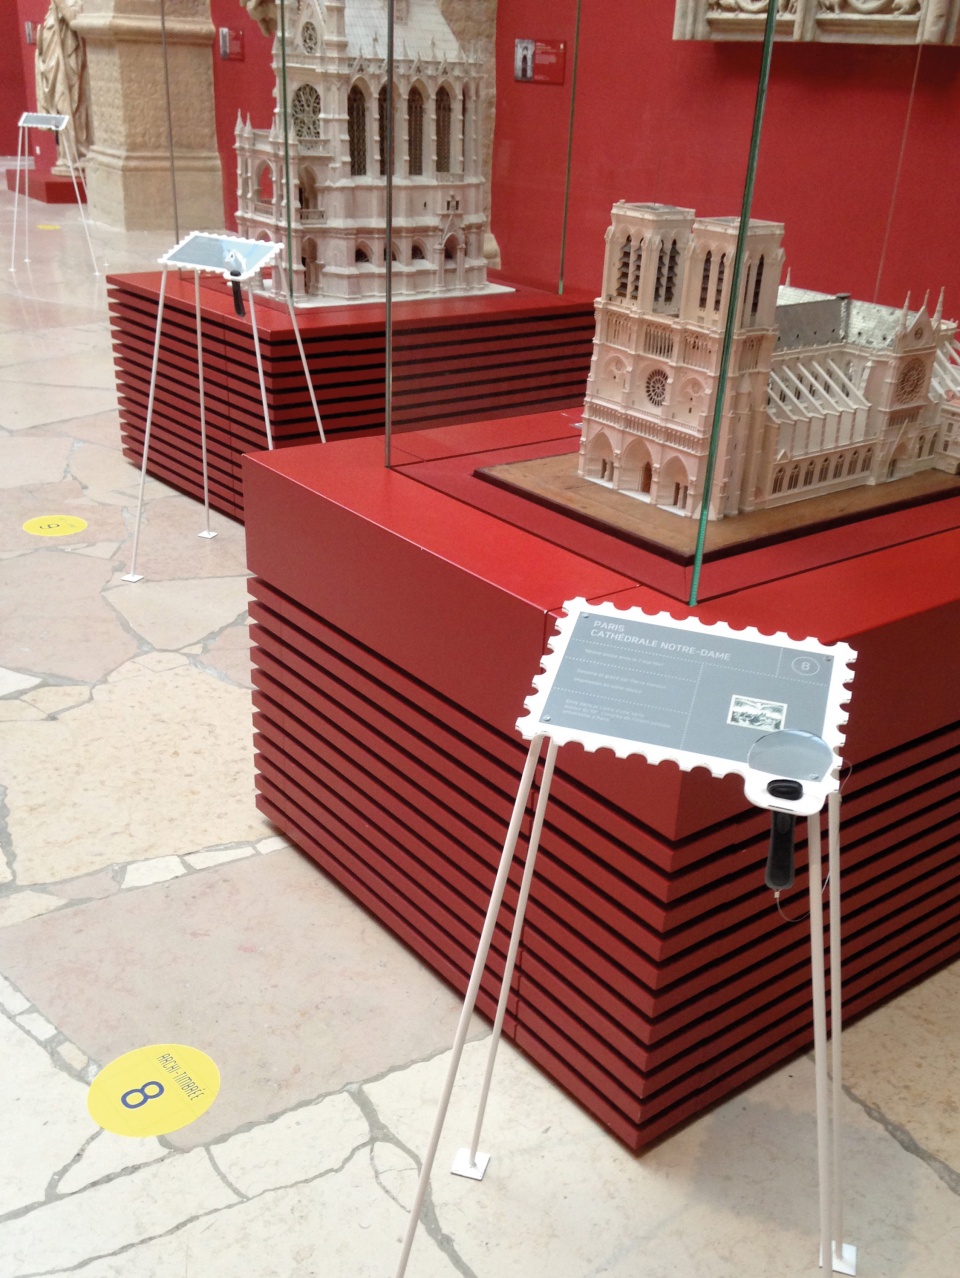 UNE EXPOSITION ARCHI+TIMBRES